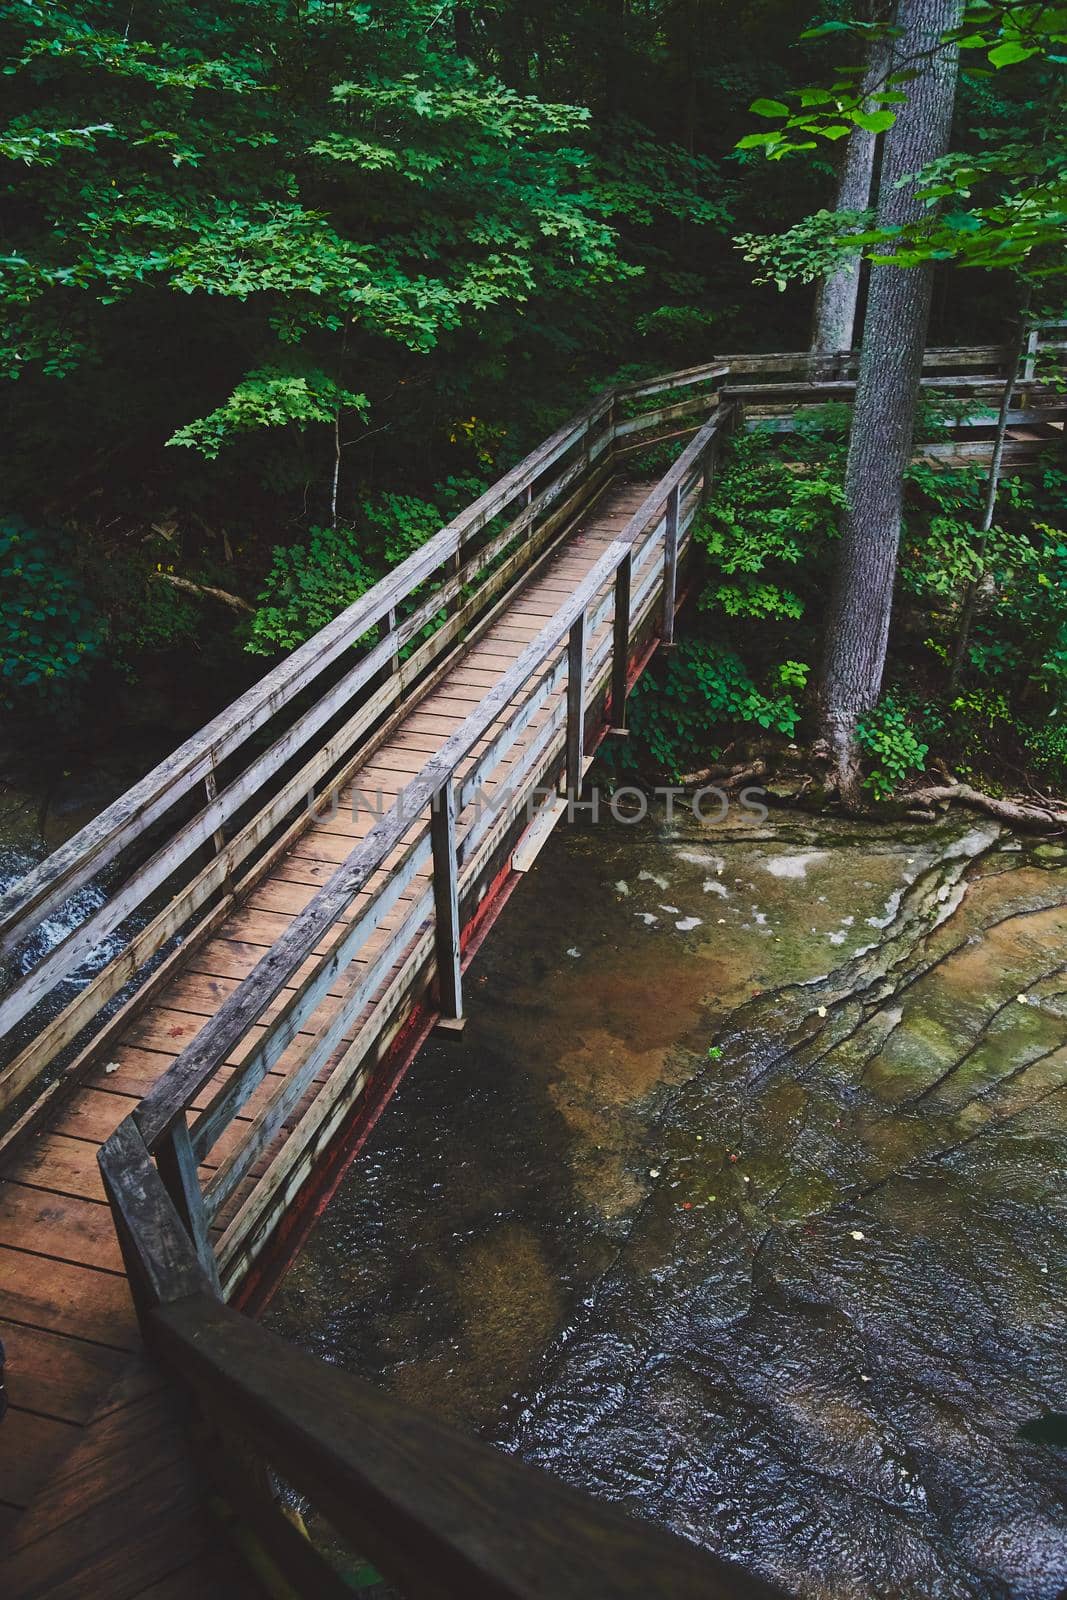 Image of Walking bridge in forest over shallow river with large sheets of rock